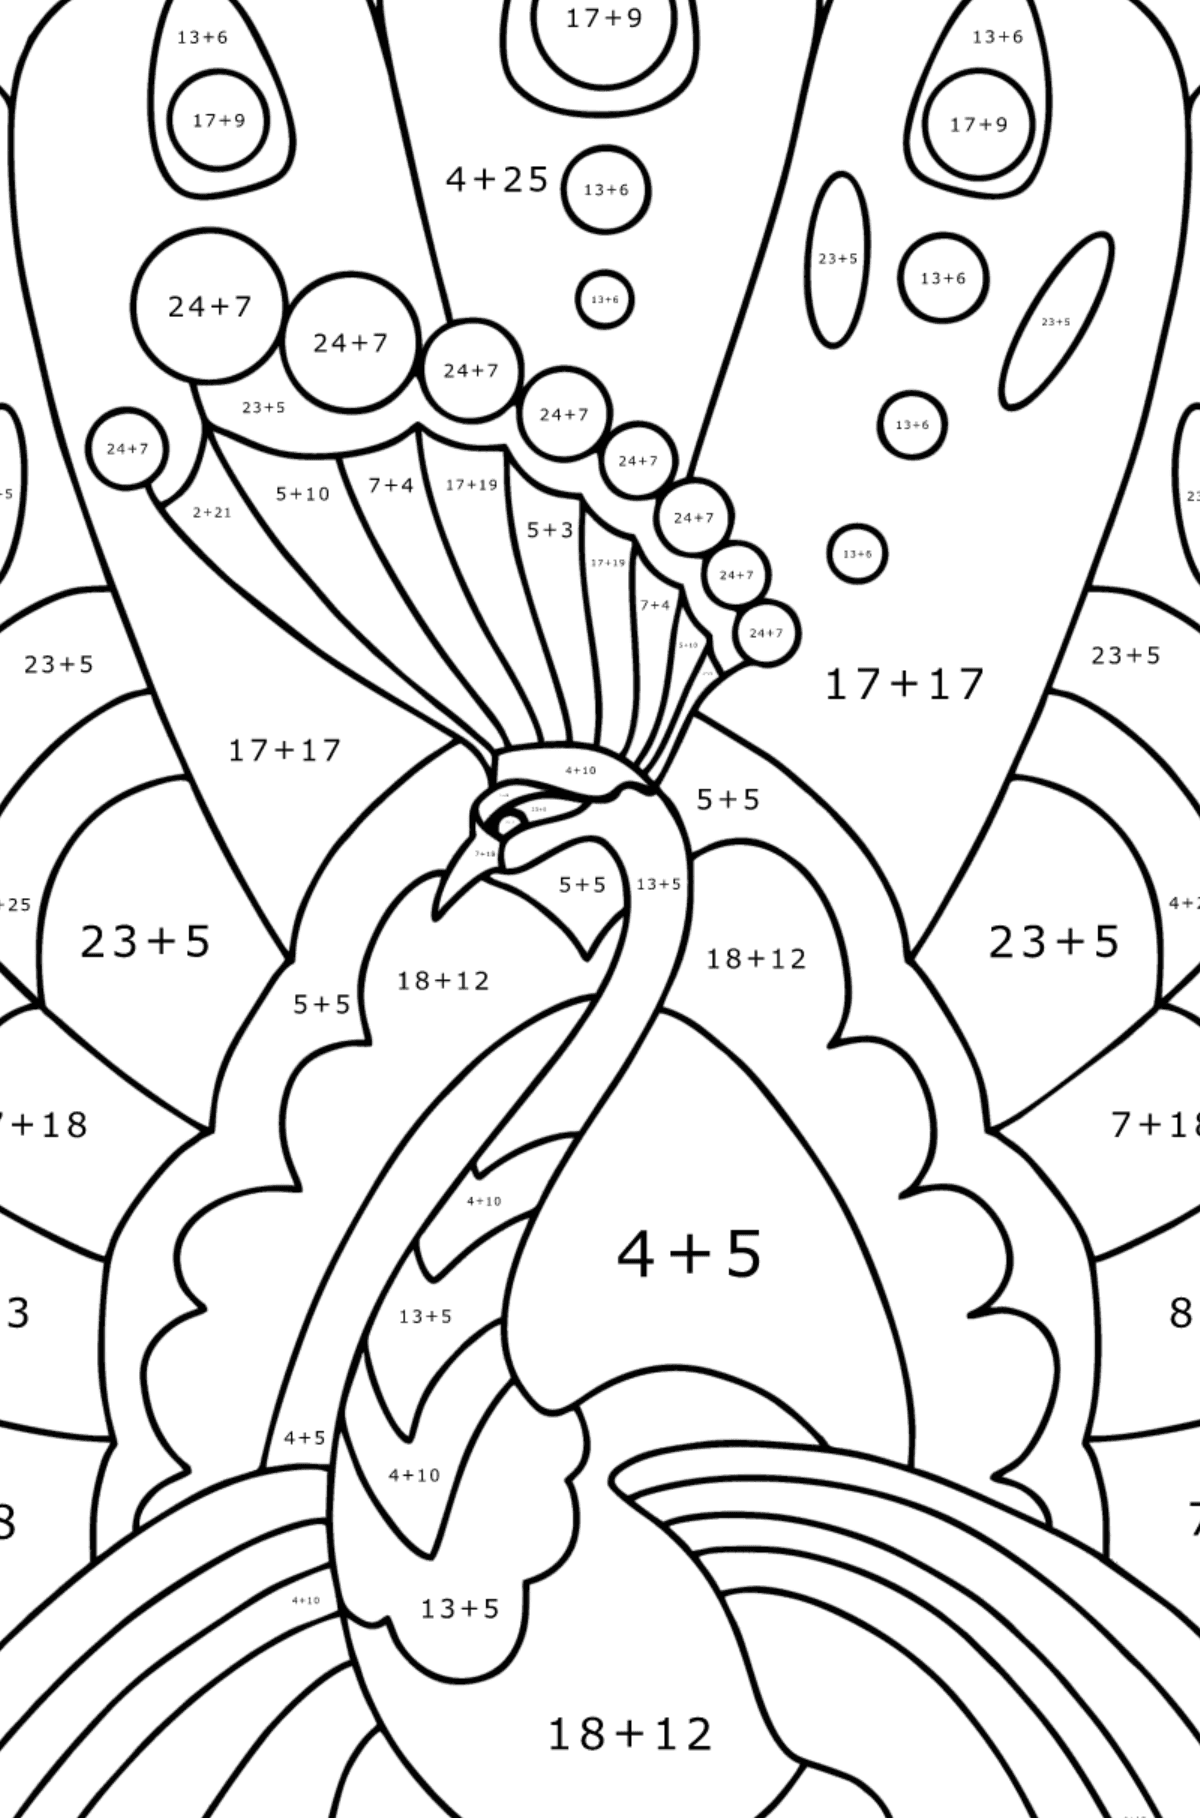 Peacock - Peacocks Coloring pages for Adults online